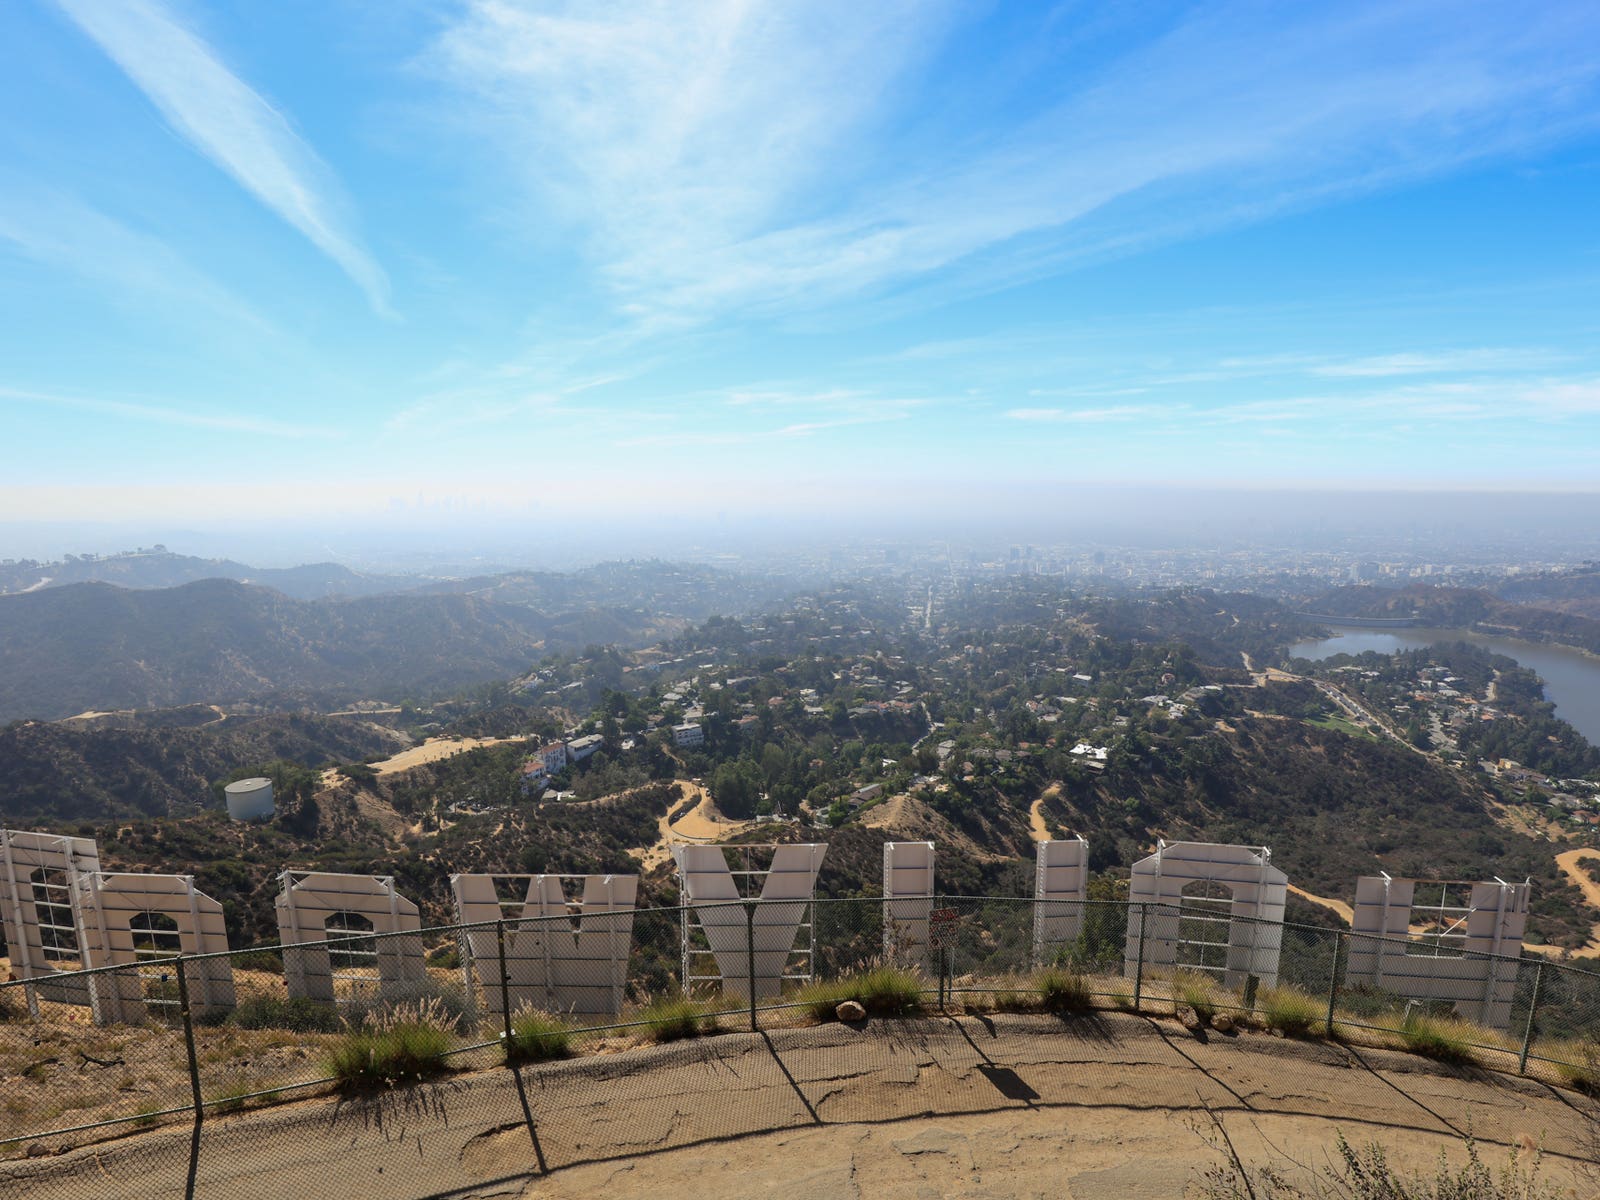 Hollywood Sign viewed from Mount Lee